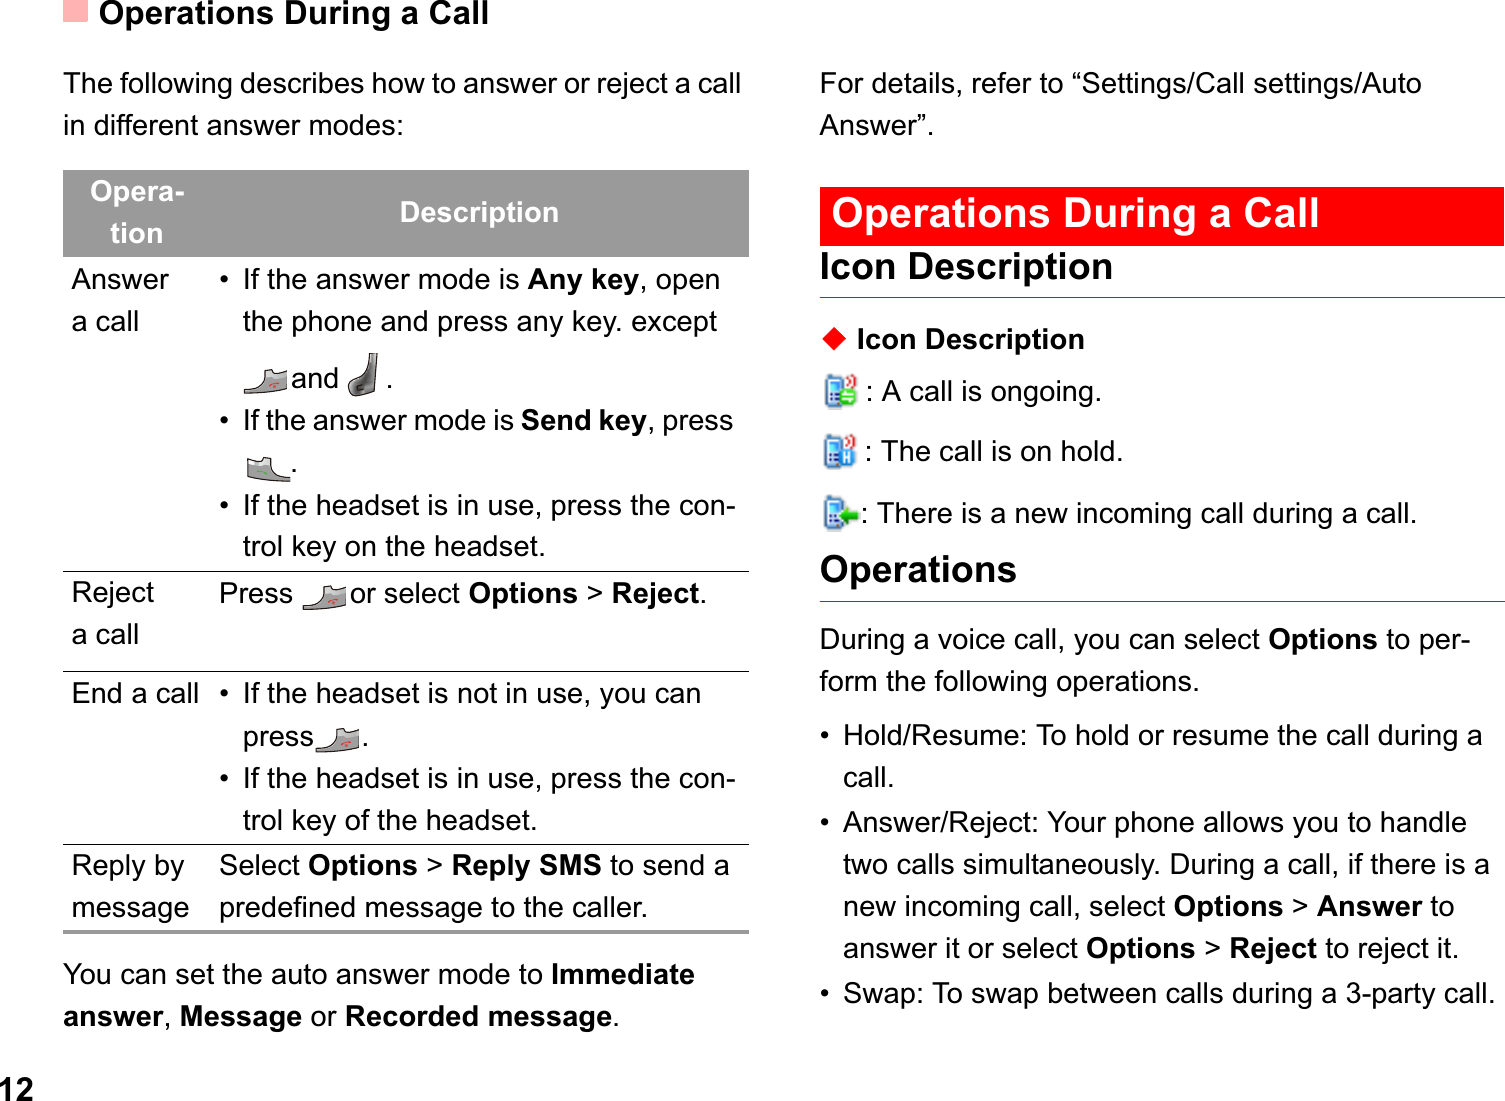 Operations During a Call12The following describes how to answer or reject a call in different answer modes:You can set the auto answer mode to Immediate answer,Message or Recorded message.For details, refer to “Settings/Call settings/Auto Answer”. Operations During a CallIcon DescriptionƹIcon Description: A call is ongoing.: The call is on hold.: There is a new incoming call during a call.OperationsDuring a voice call, you can select Options to per-form the following operations.• Hold/Resume: To hold or resume the call during a call.• Answer/Reject: Your phone allows you to handle two calls simultaneously. During a call, if there is a new incoming call, select Options &gt; Answer to answer it or select Options &gt; Reject to reject it.• Swap: To swap between calls during a 3-party call.Opera-tion DescriptionAnswera call• If the answer mode is Any key, open the phone and press any key. except and .• If the answer mode is Send key, press .• If the headset is in use, press the con-trol key on the headset.Rejecta callPress  or select Options &gt; Reject.End a call • If the headset is not in use, you can press . • If the headset is in use, press the con-trol key of the headset.Reply by messageSelect Options &gt; Reply SMS to send a predefined message to the caller.